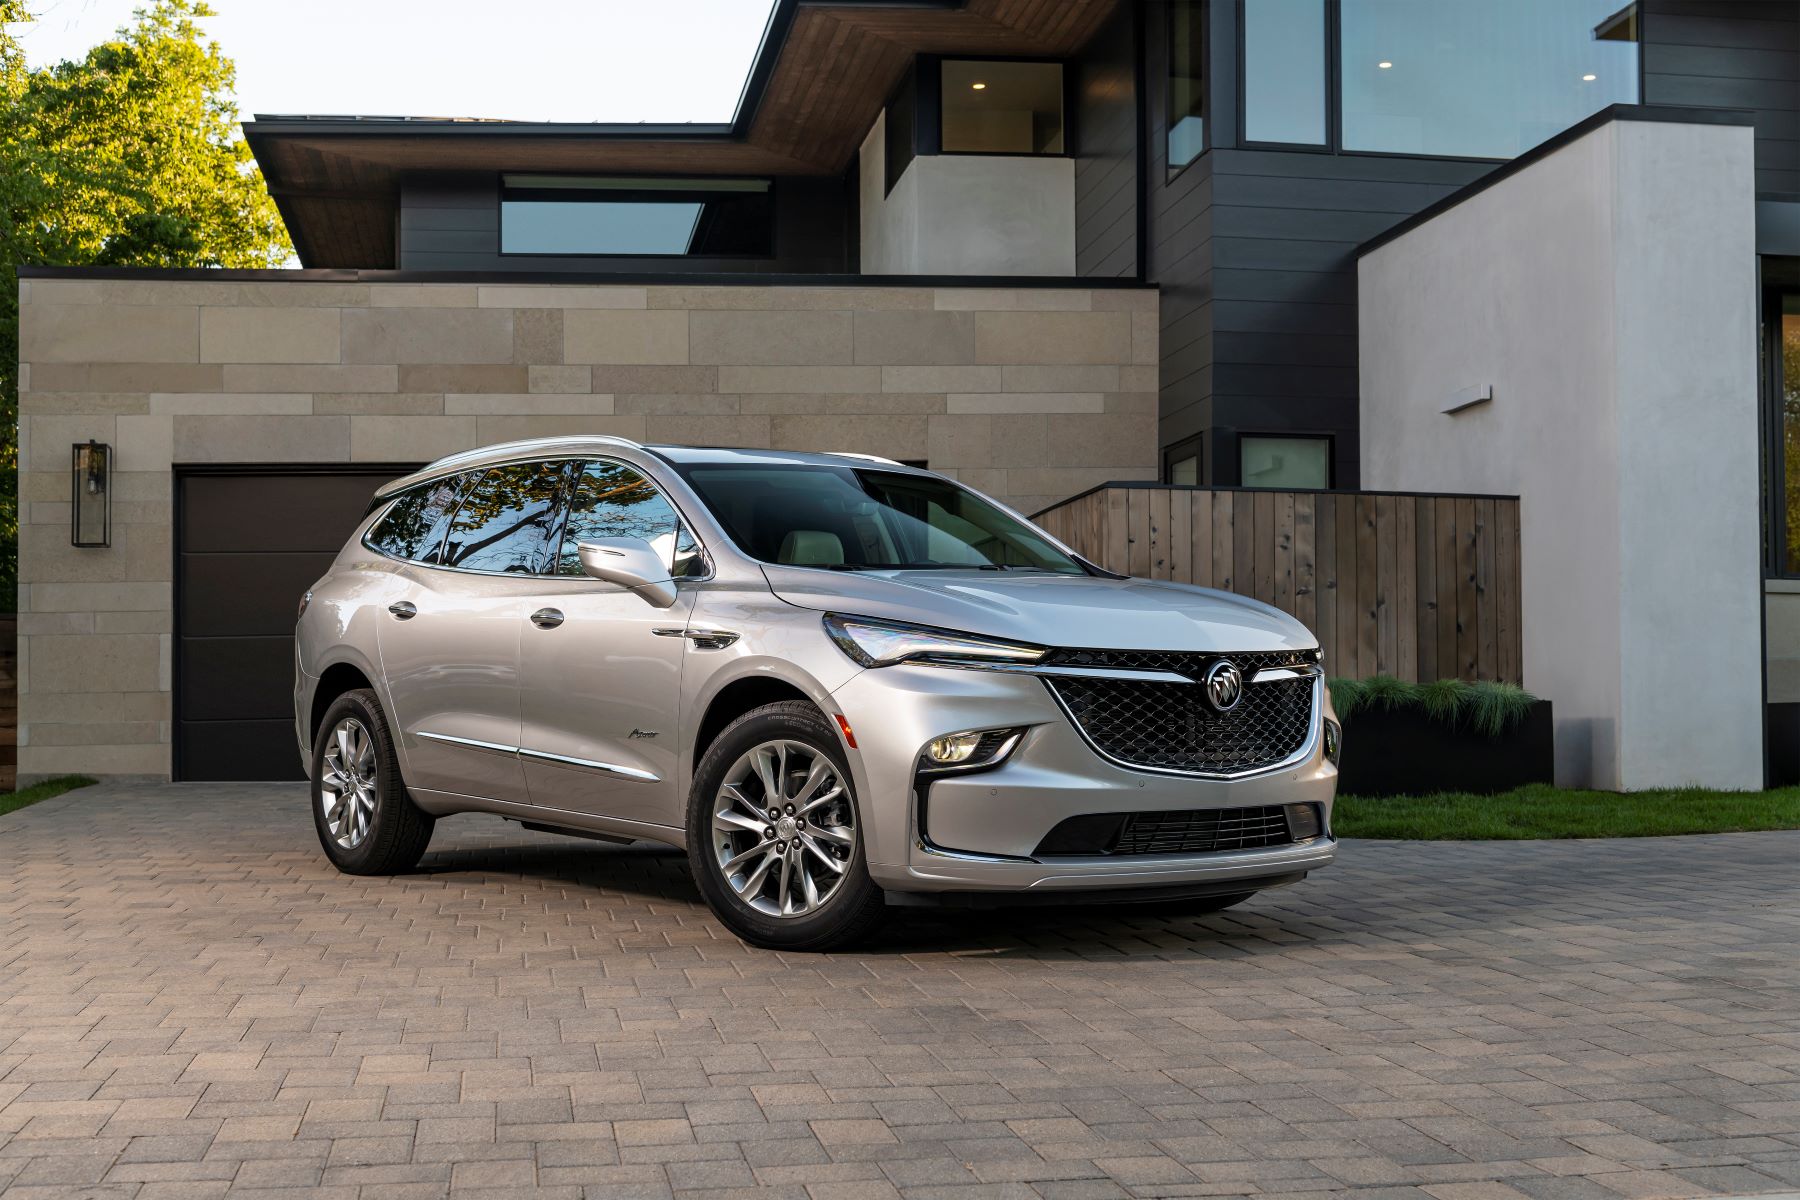 A 2022 Buick Enclave crossover SUV parked on a cobblestone brick garage driveway